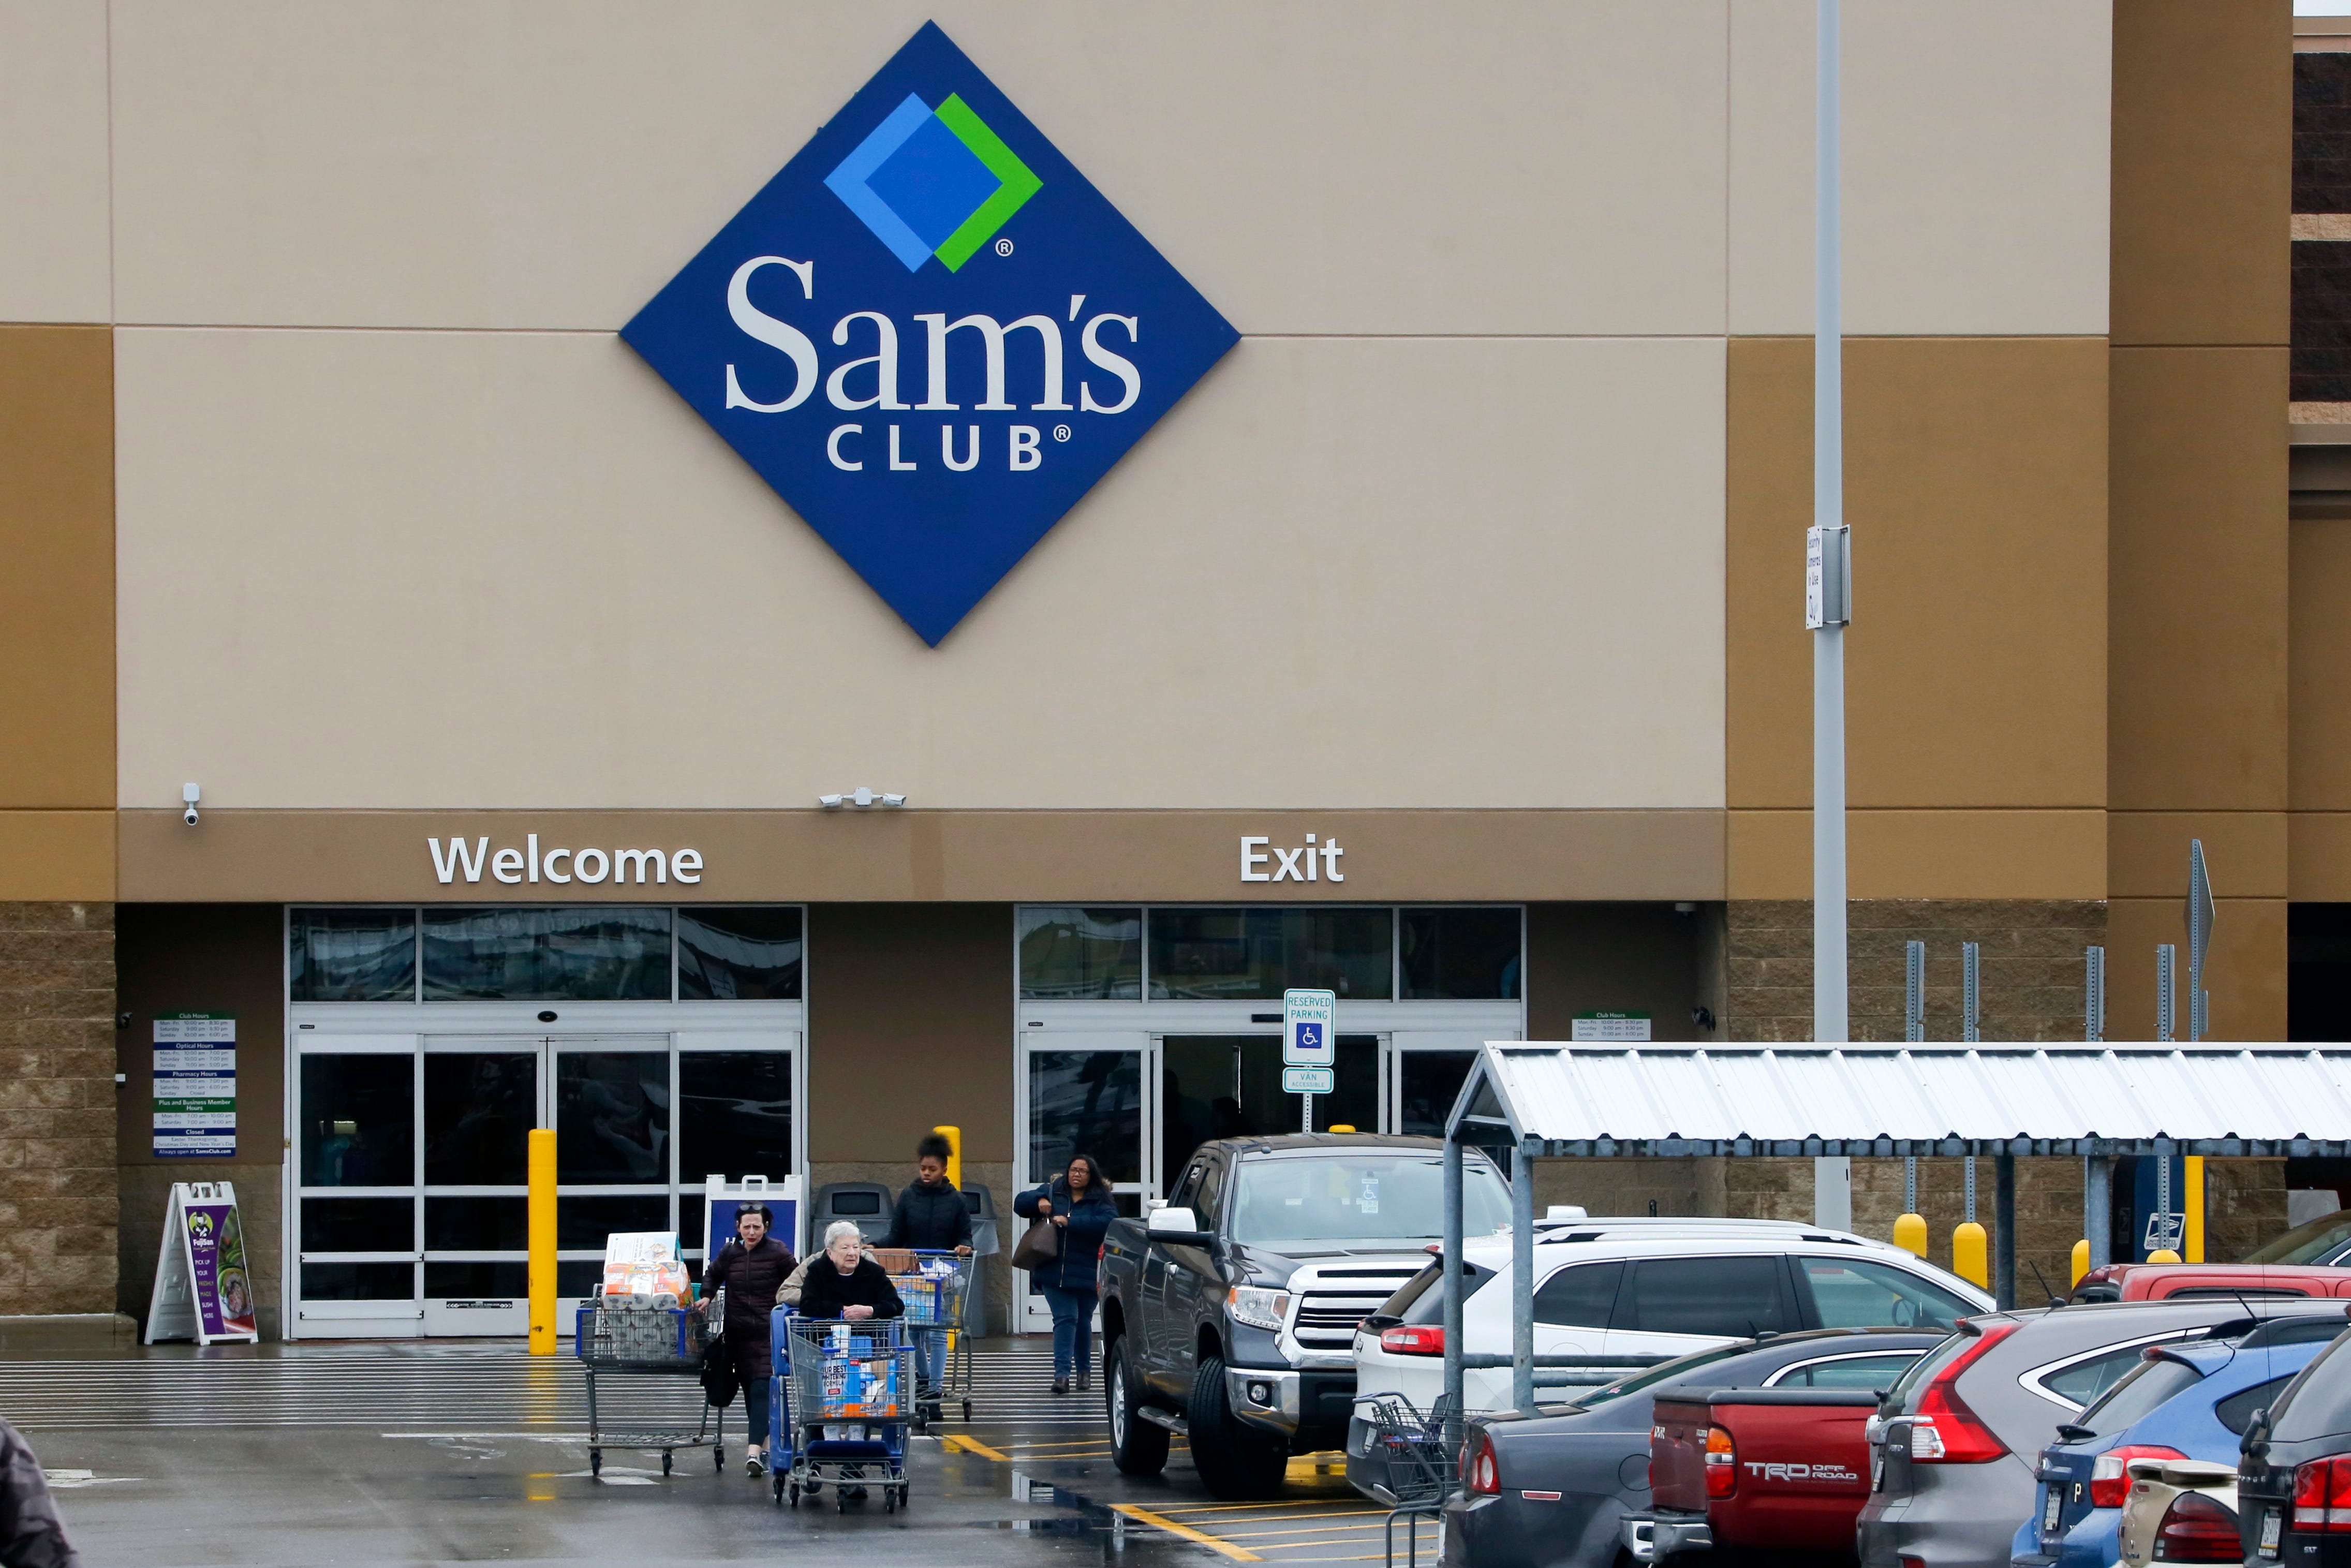 Walmart's Sam's Club to add 30 stores; first new location in Florida